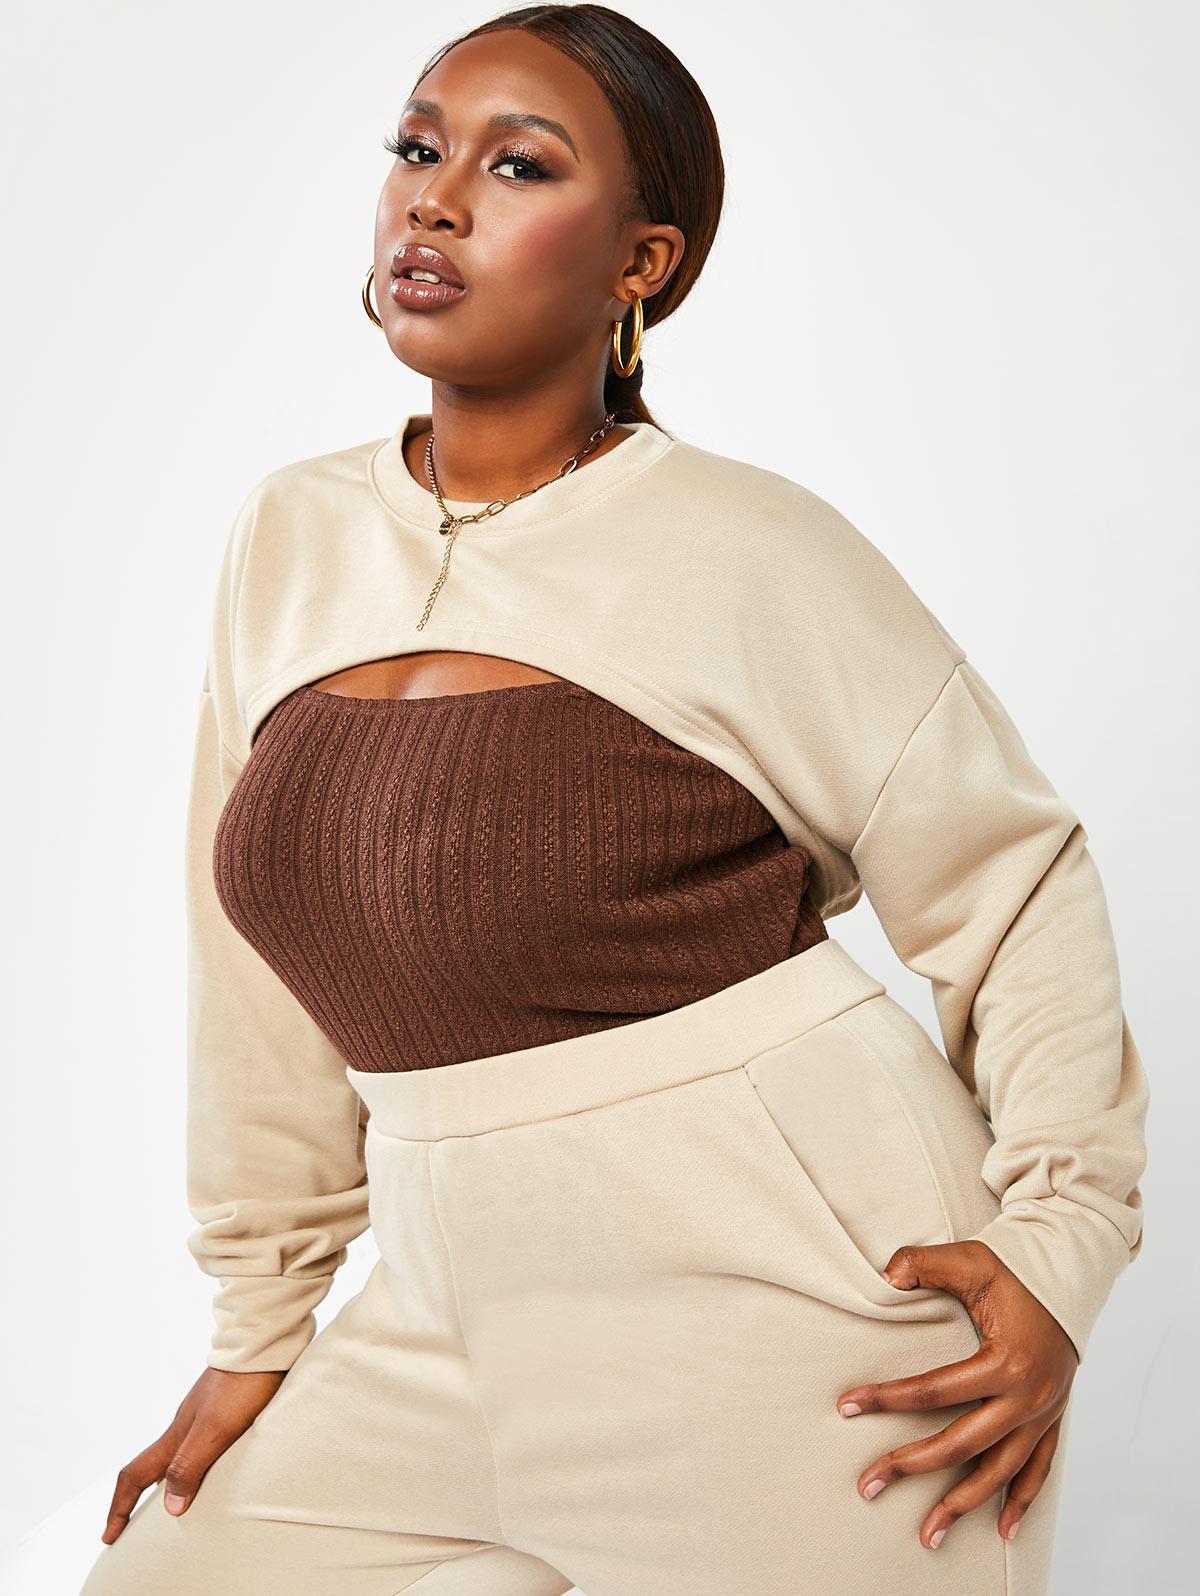 Zaful Hoodies Plus Size French Terry Super Cropped Sweatshirt 5xl in Brown  | Lyst